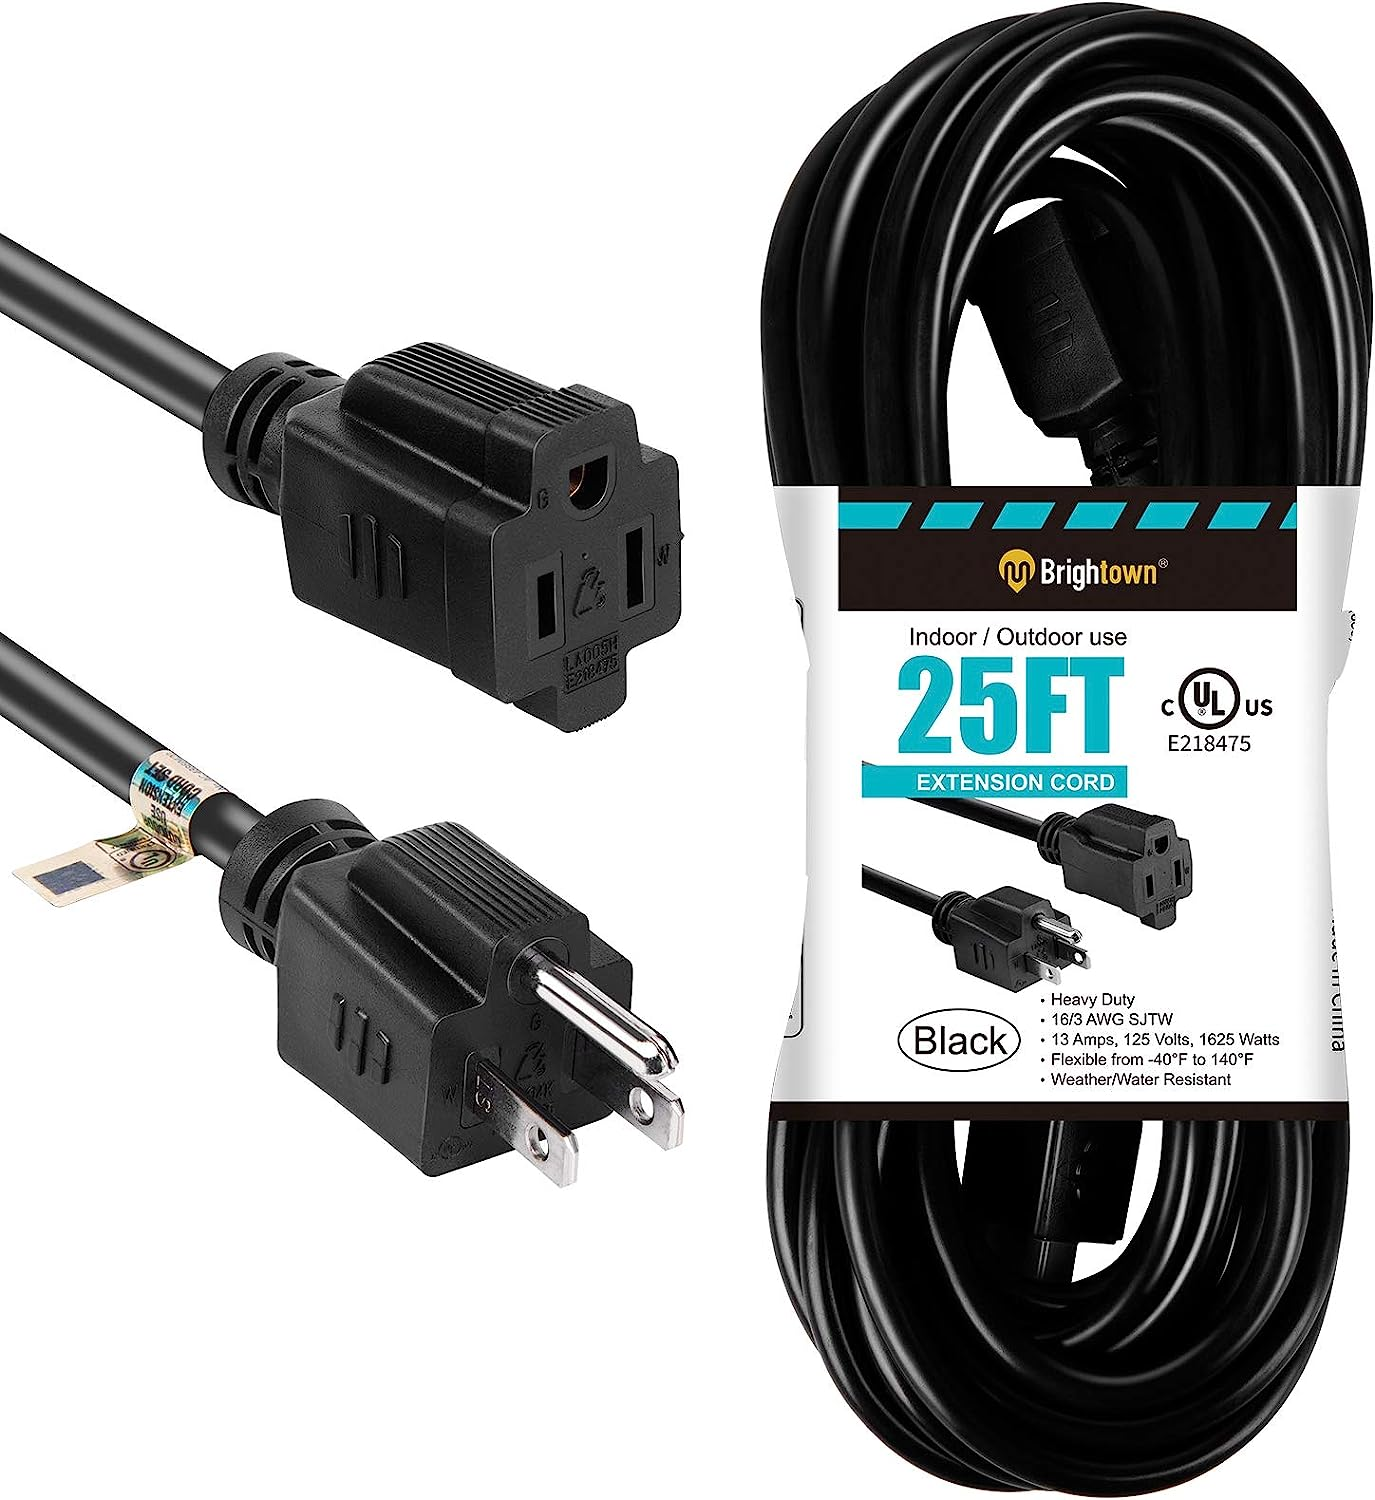 Outdoor Extension Cord with 3 Prong Grounded Outlets, Black